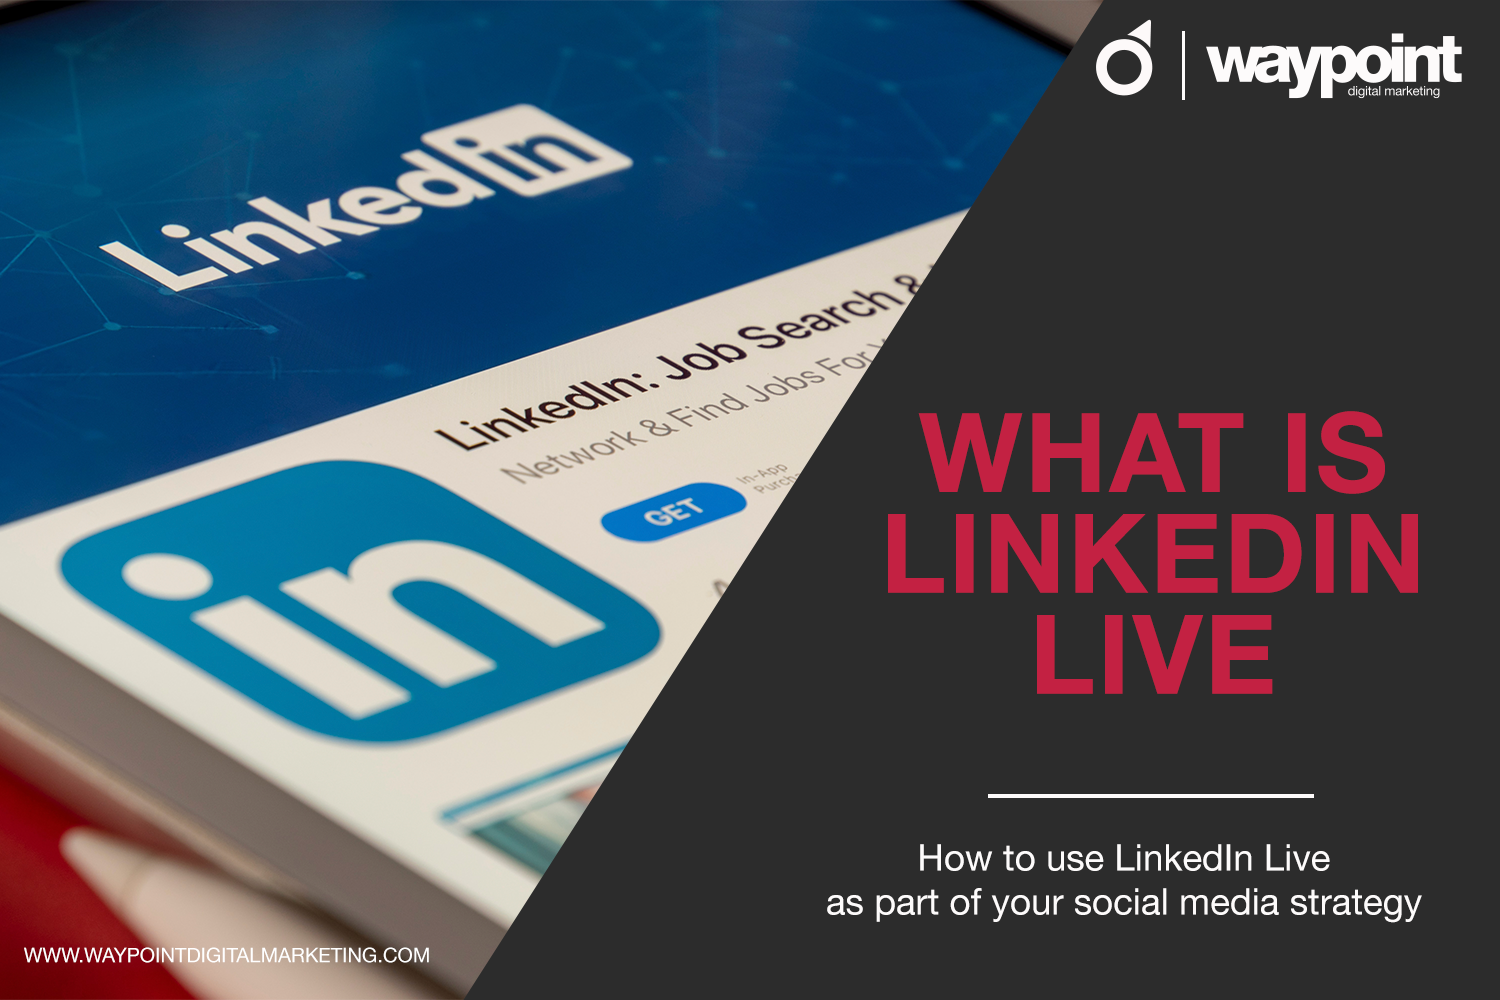 What is LinkedIn Live and how to use it? Latest Waypoint News Marketing Agency Winchester, Hampshire